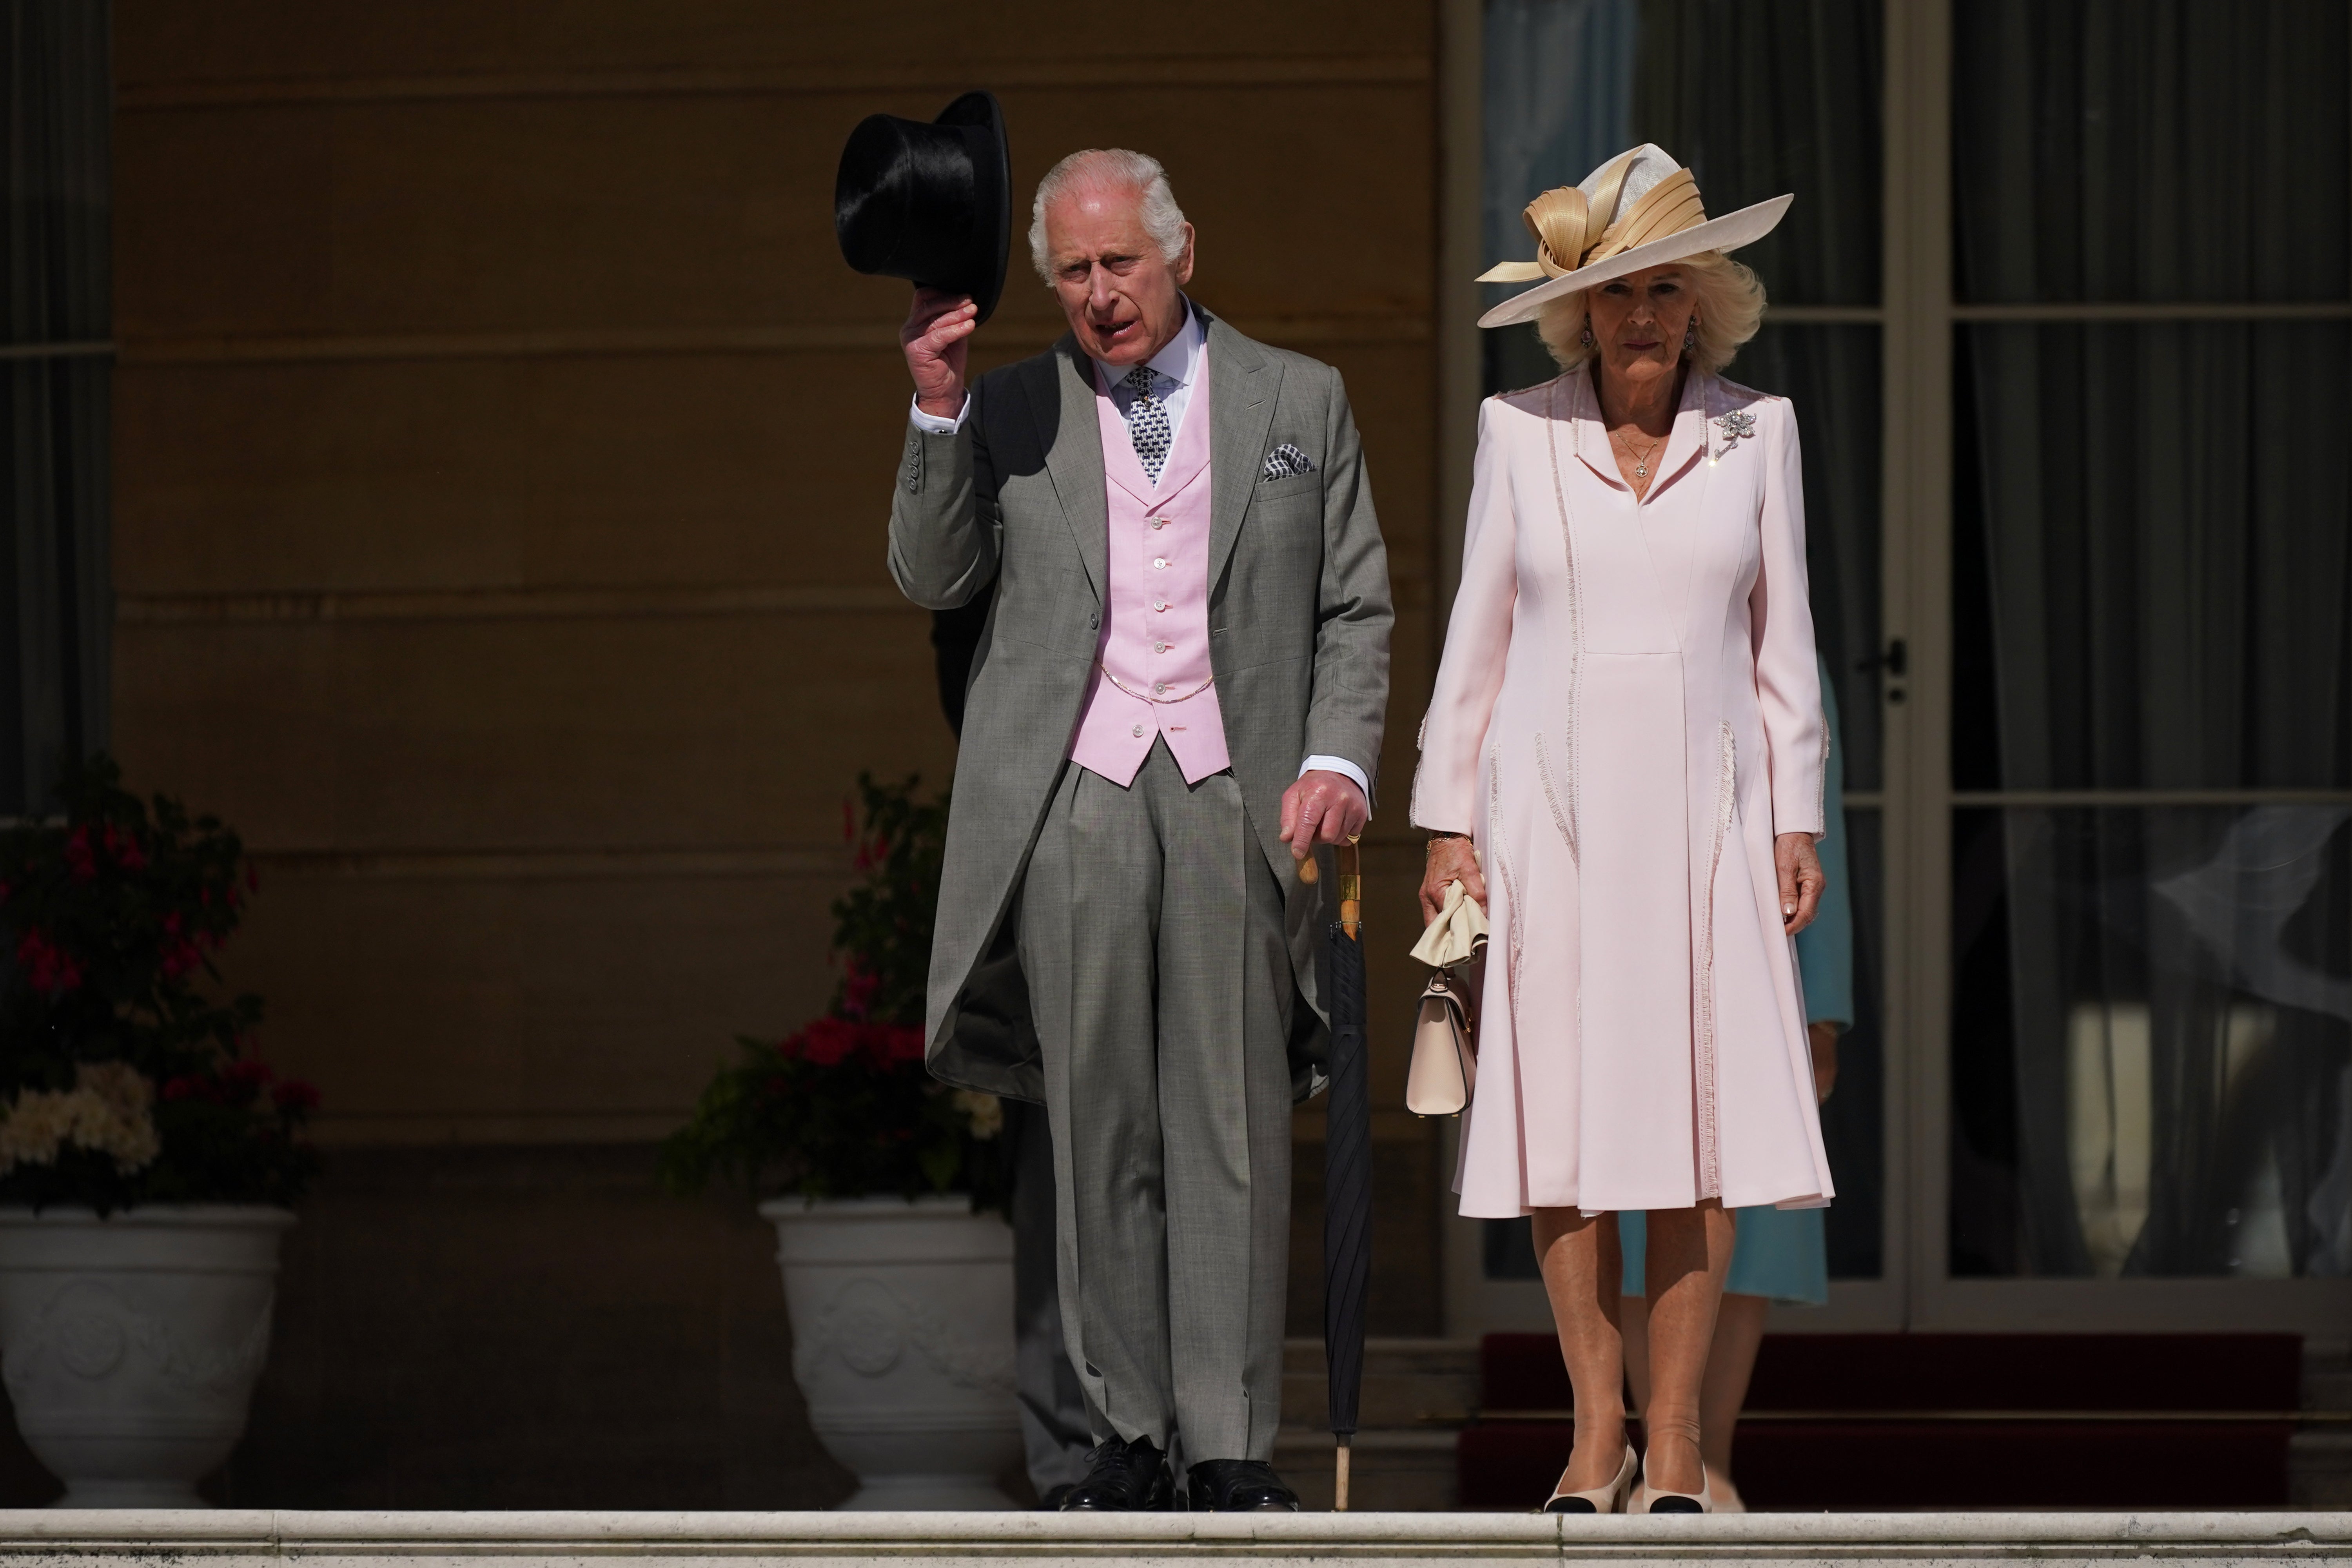 The King and Queen arrive at the garden party with a touch of pink